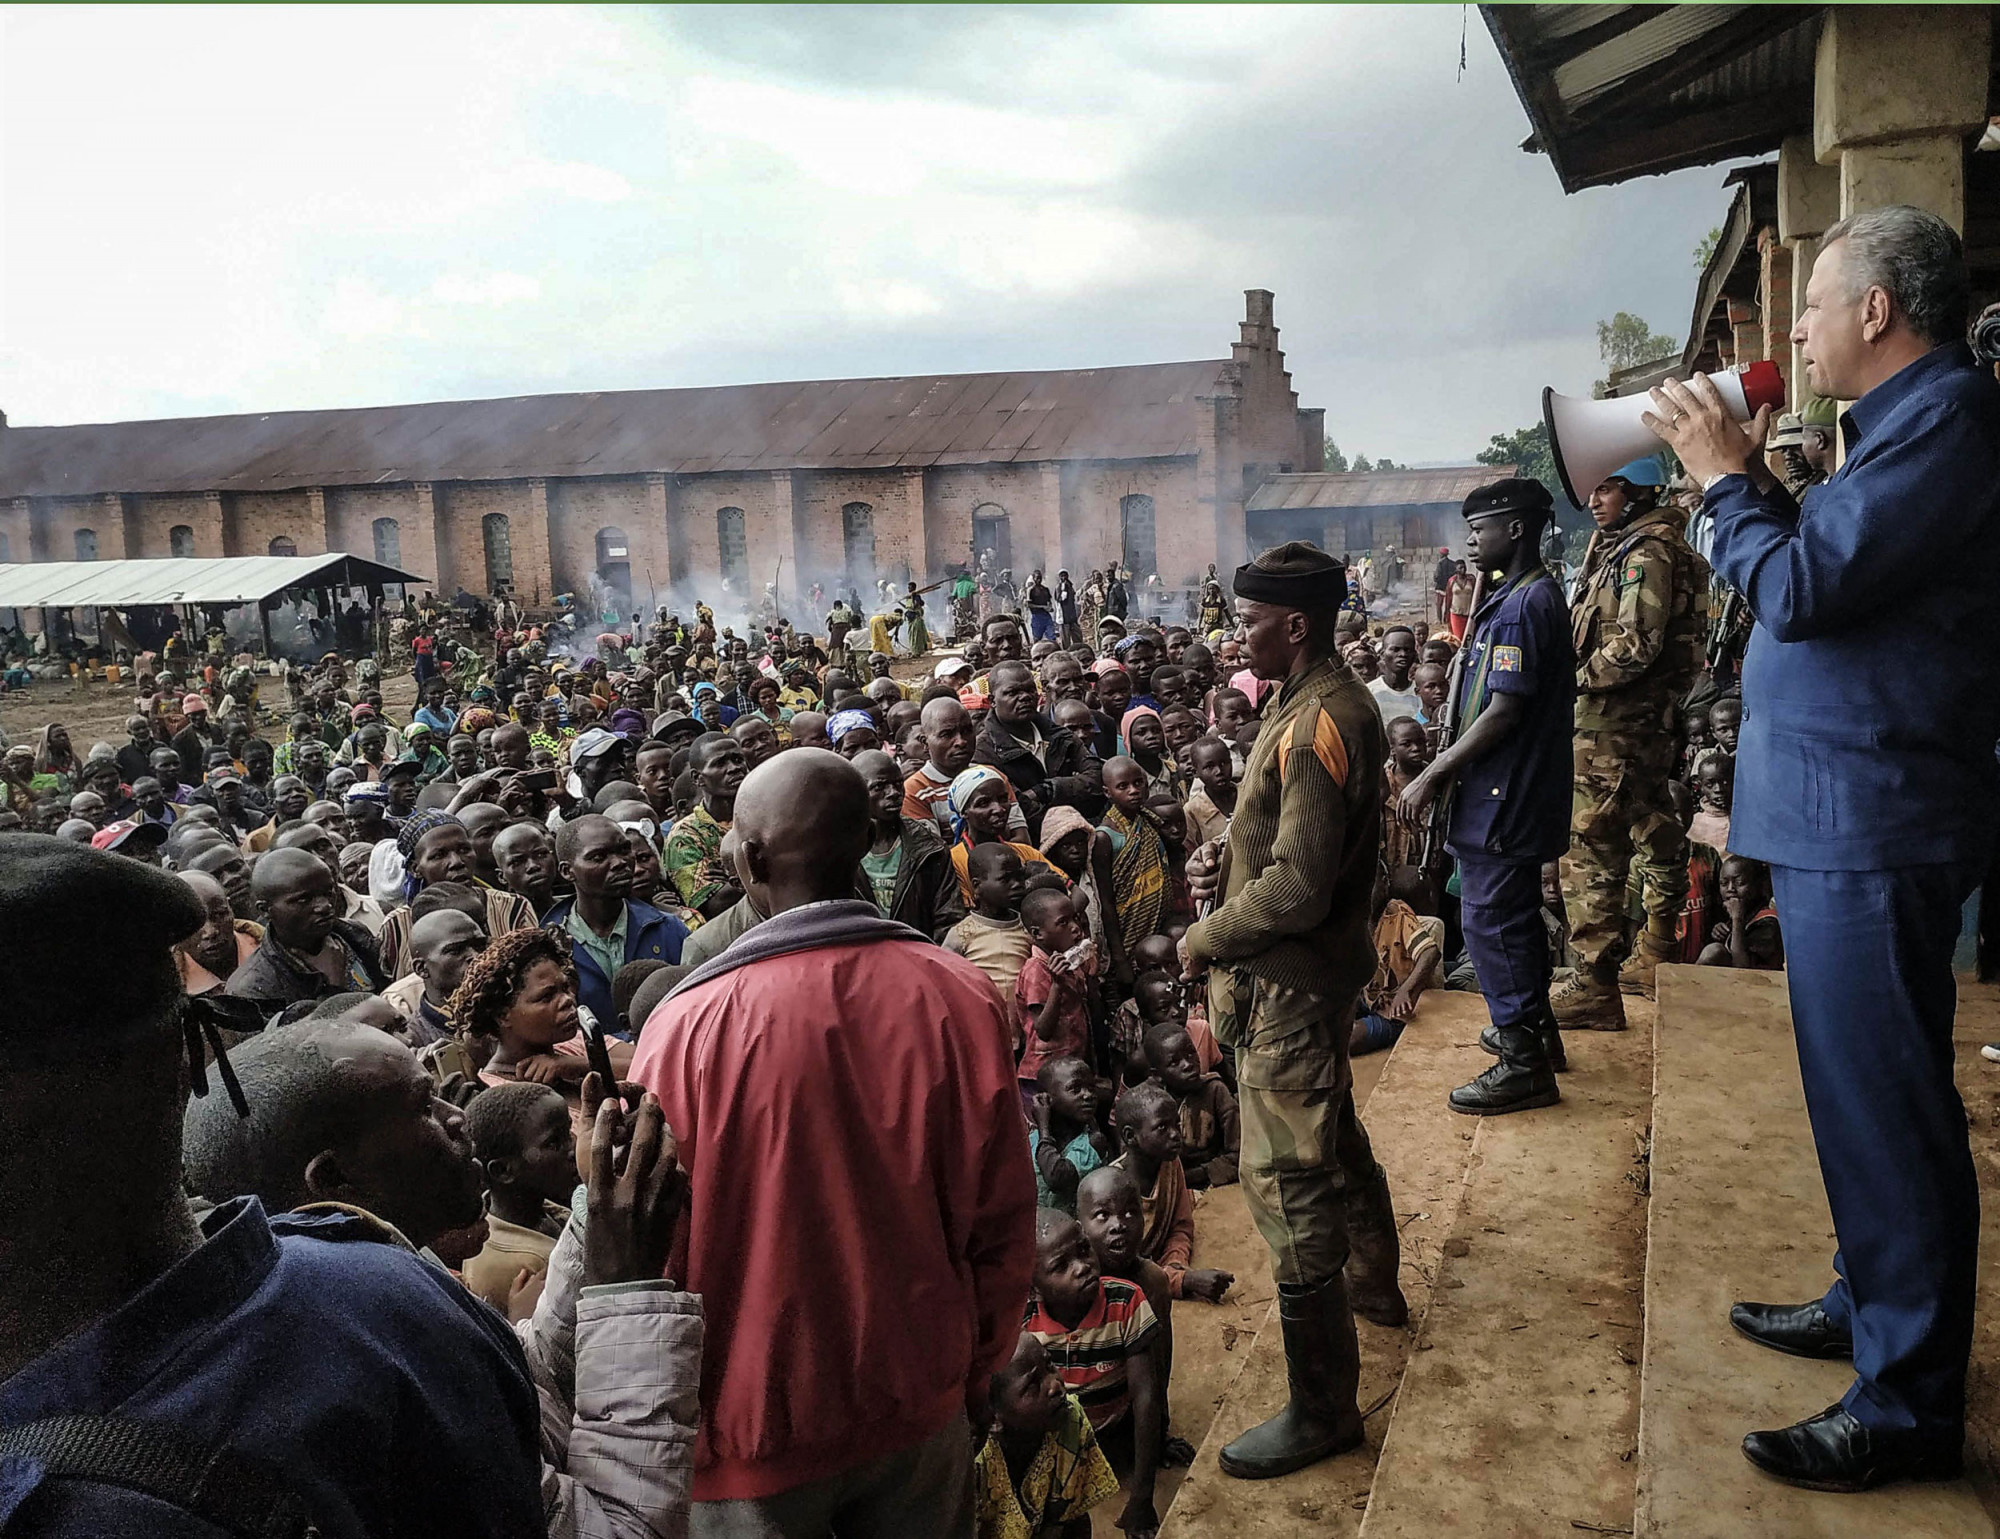 Drodro, DRC, June 2019. The governor of Ituri province, Jean Bamanisa Saidi (right), addresses a crowd of displaced people in the town of Drodro last year after a series of massacres in villages in Djugu territory killed 161 people. © From the archive of Dieudonne Dirole for Fondation Carmignac